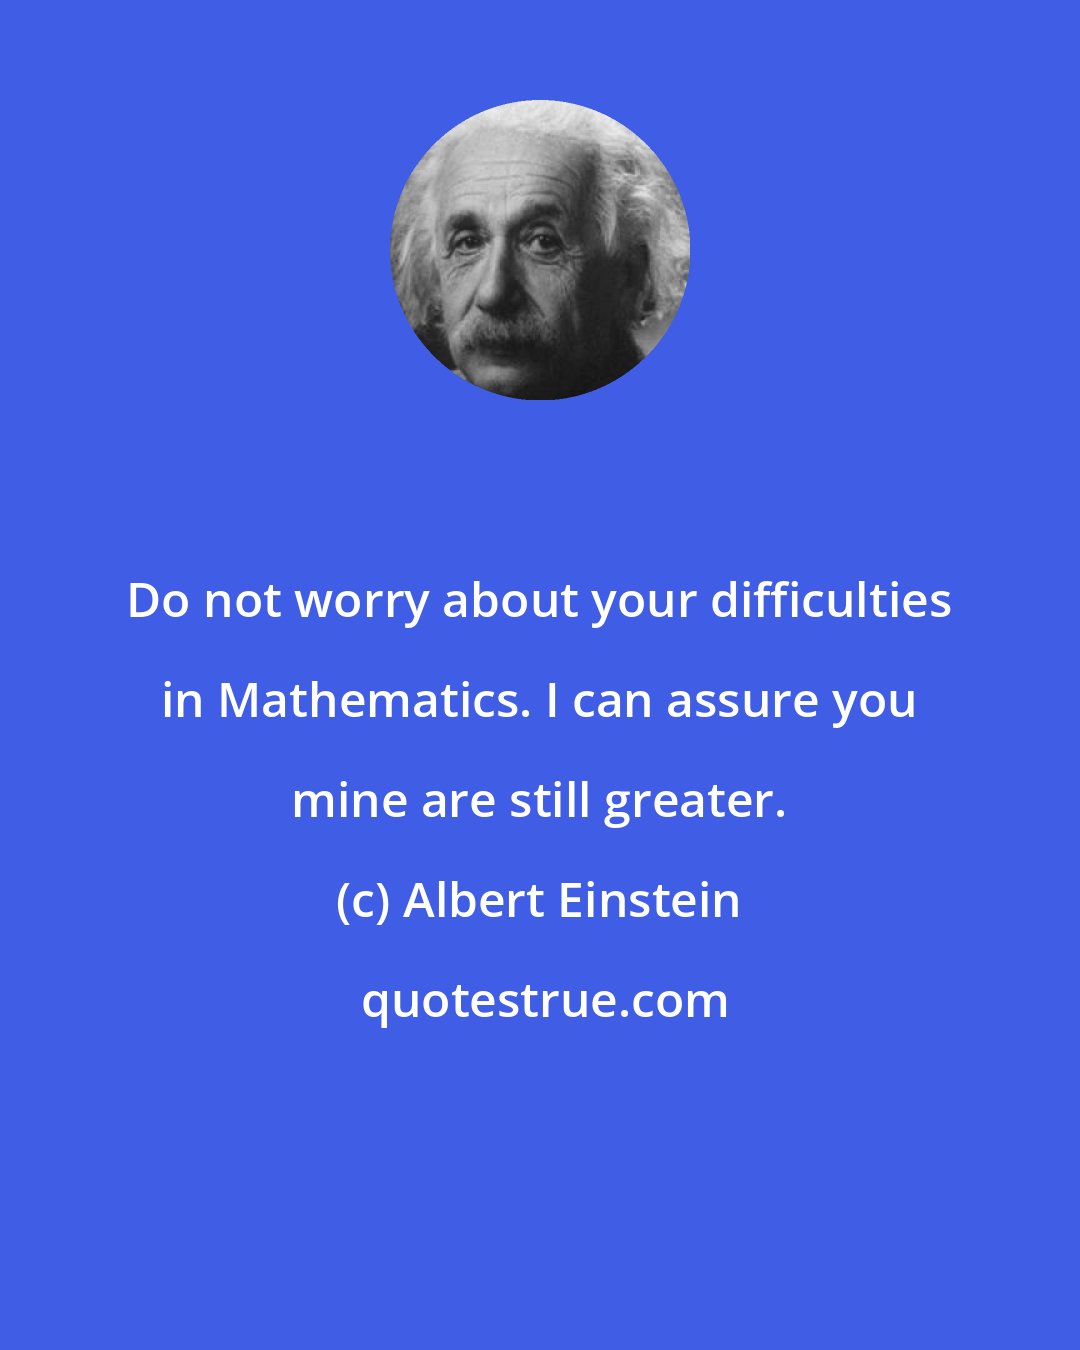 Albert Einstein: Do not worry about your difficulties in Mathematics. I can assure you mine are still greater.